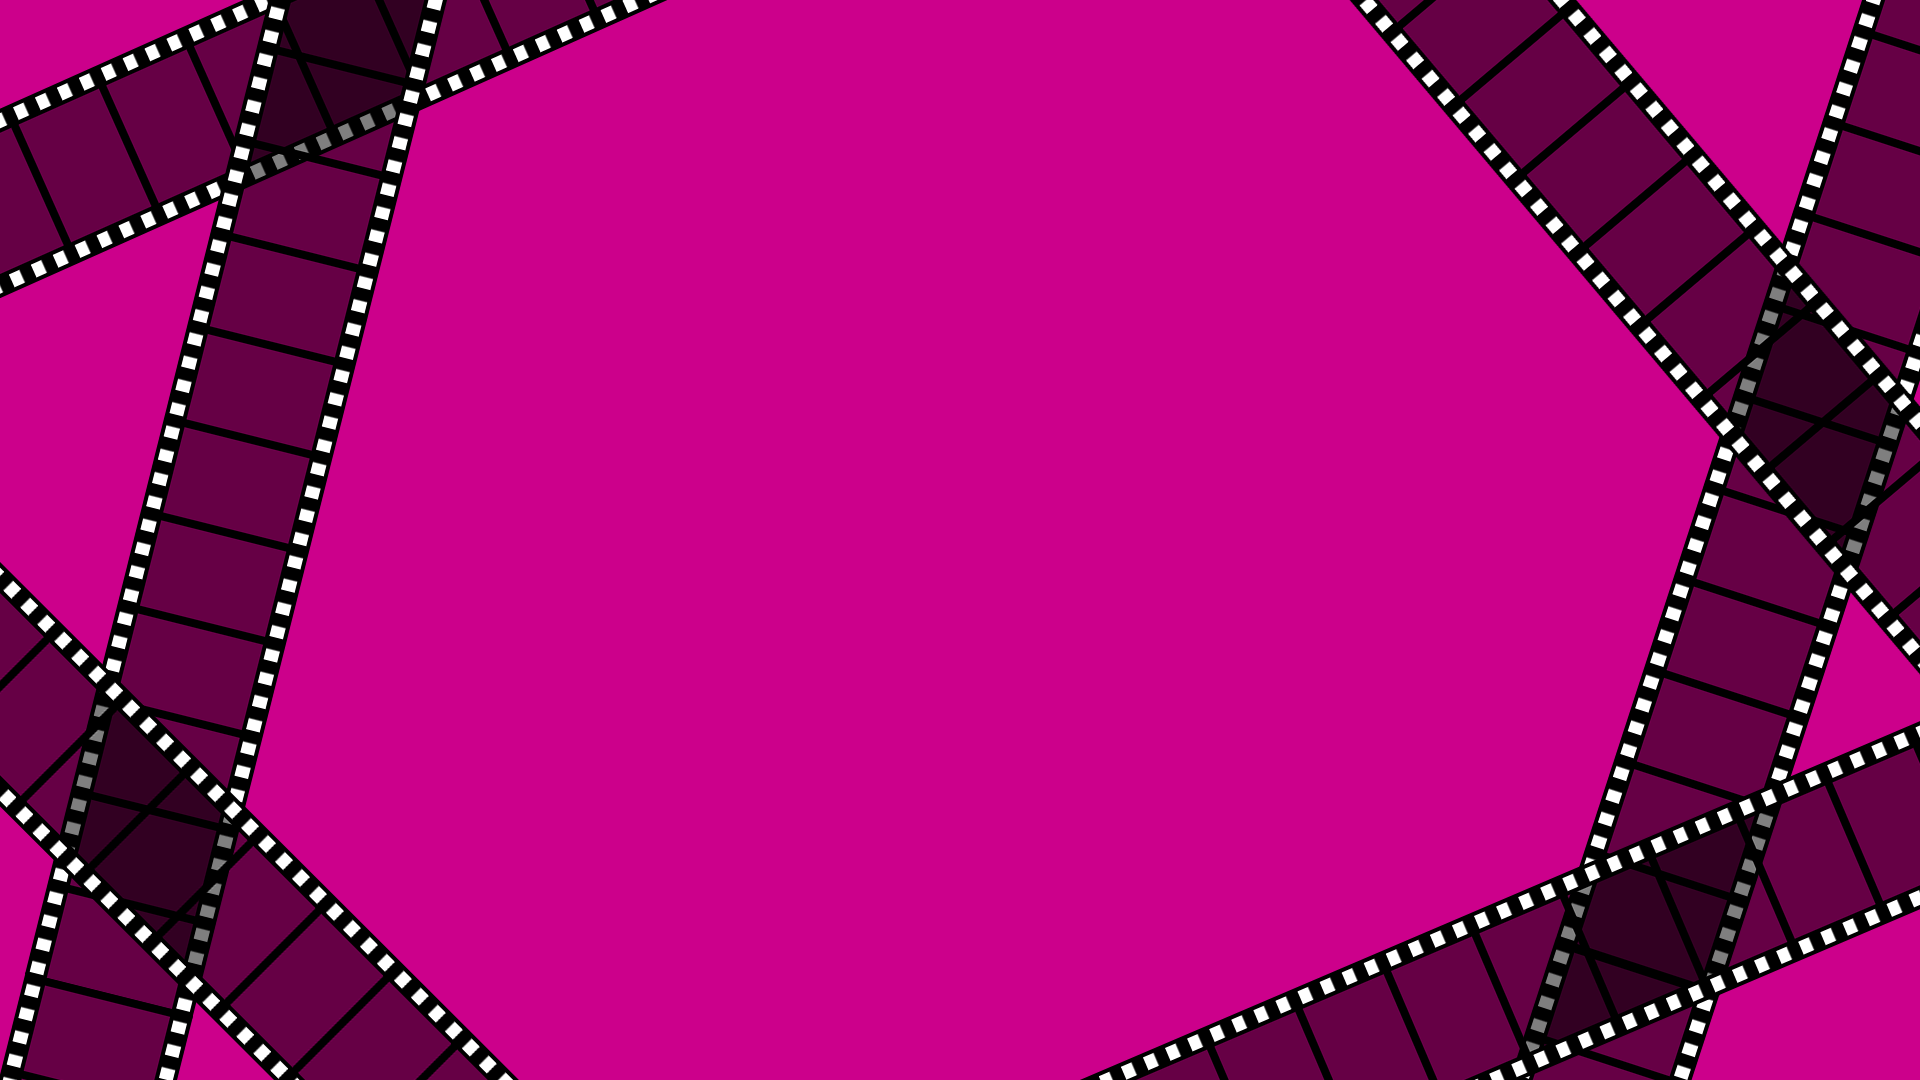 Pictures Of Pink Backgrounds 1920x1080